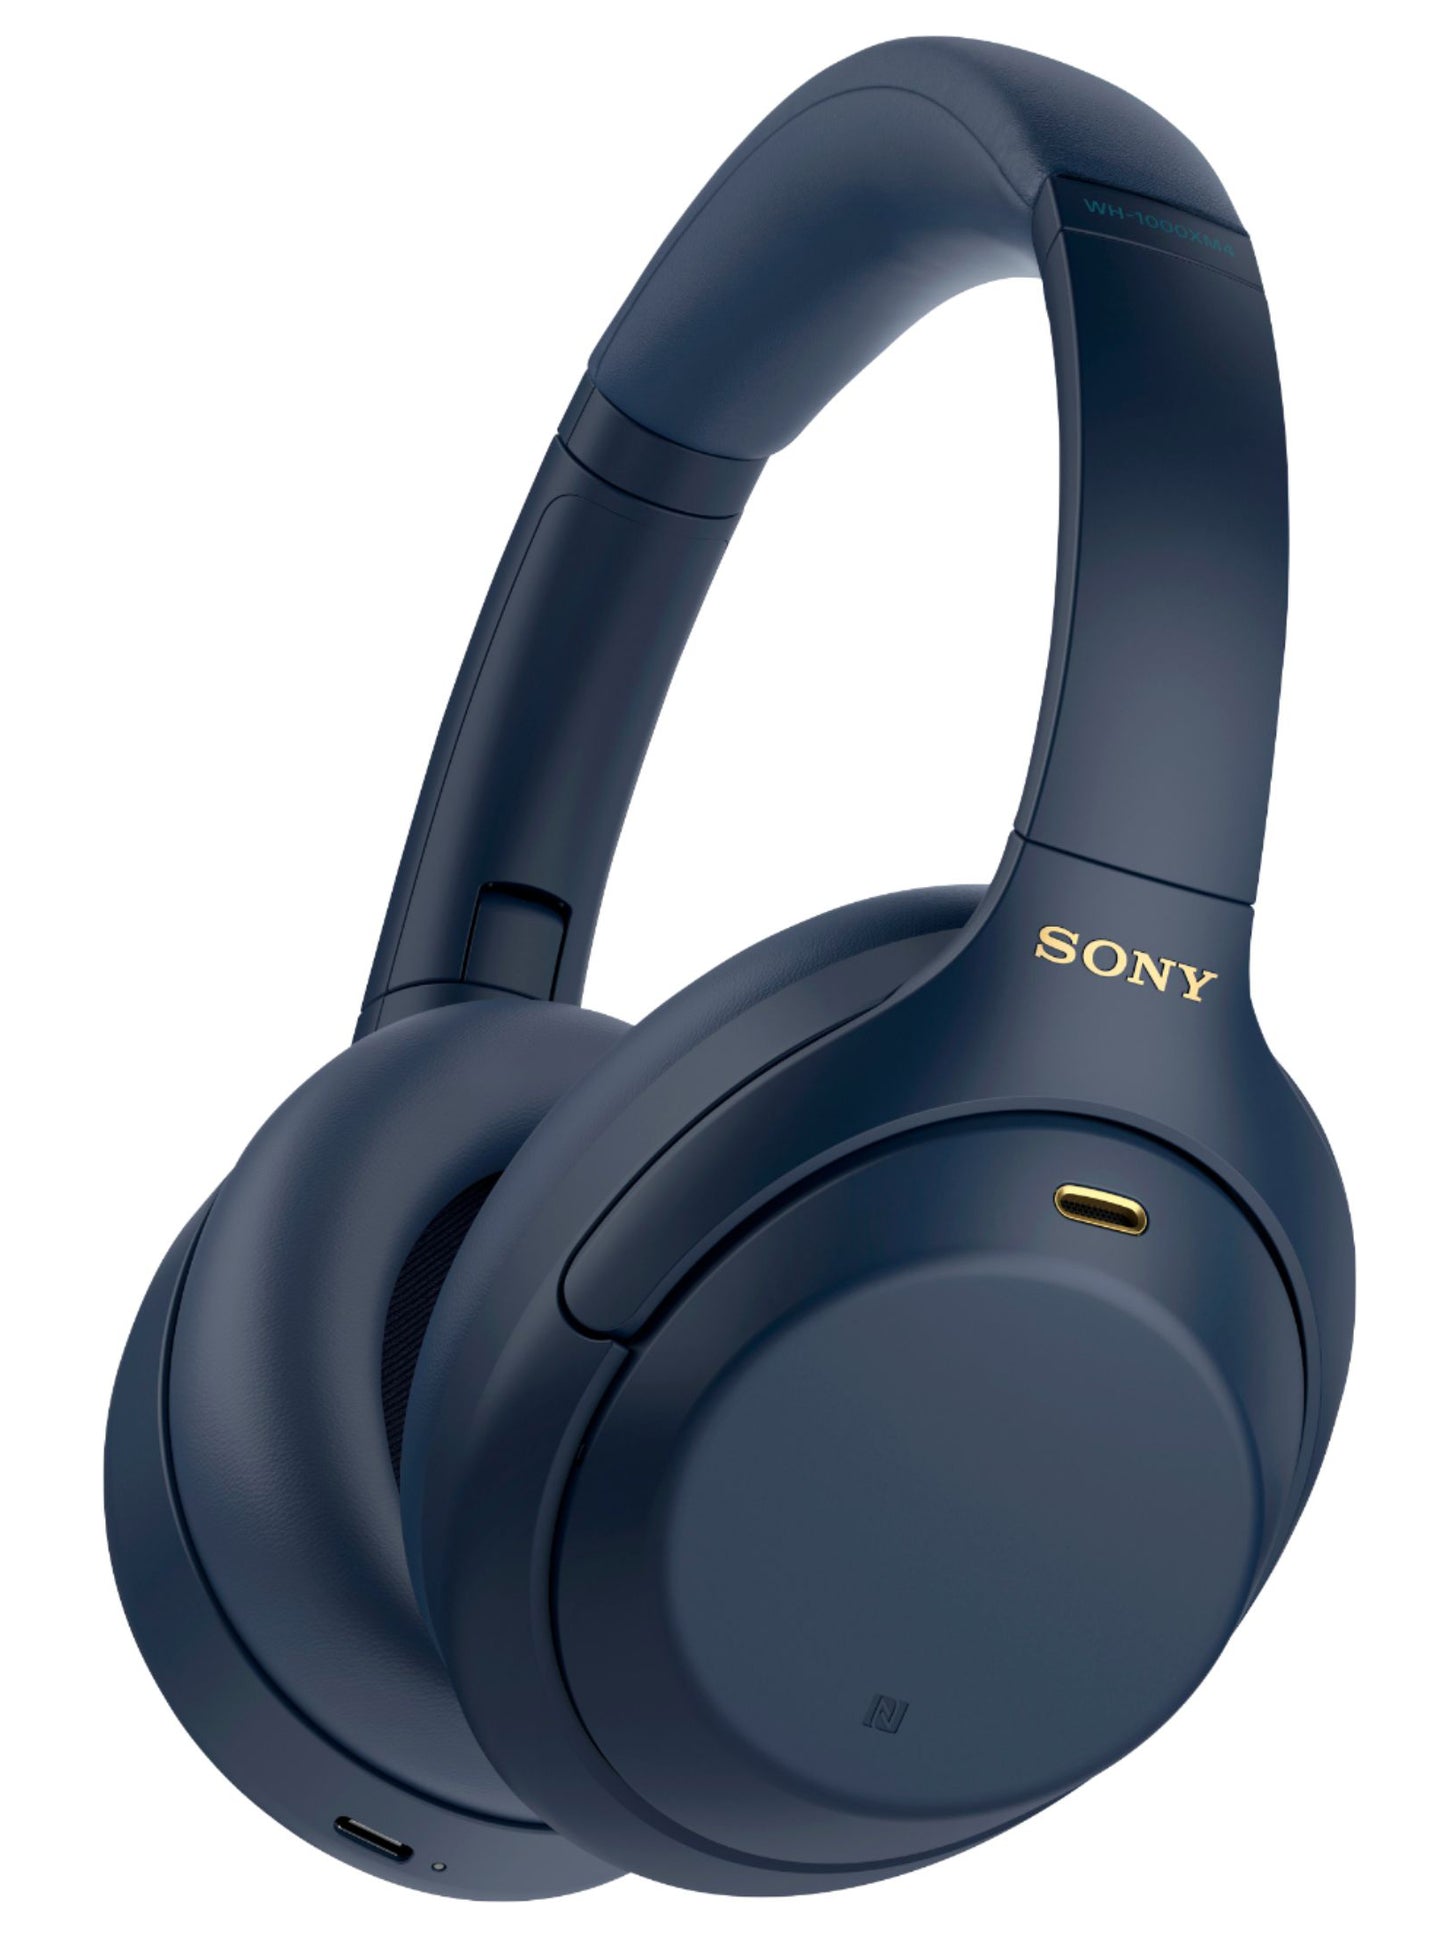 Sony wh-CH520 سماعة